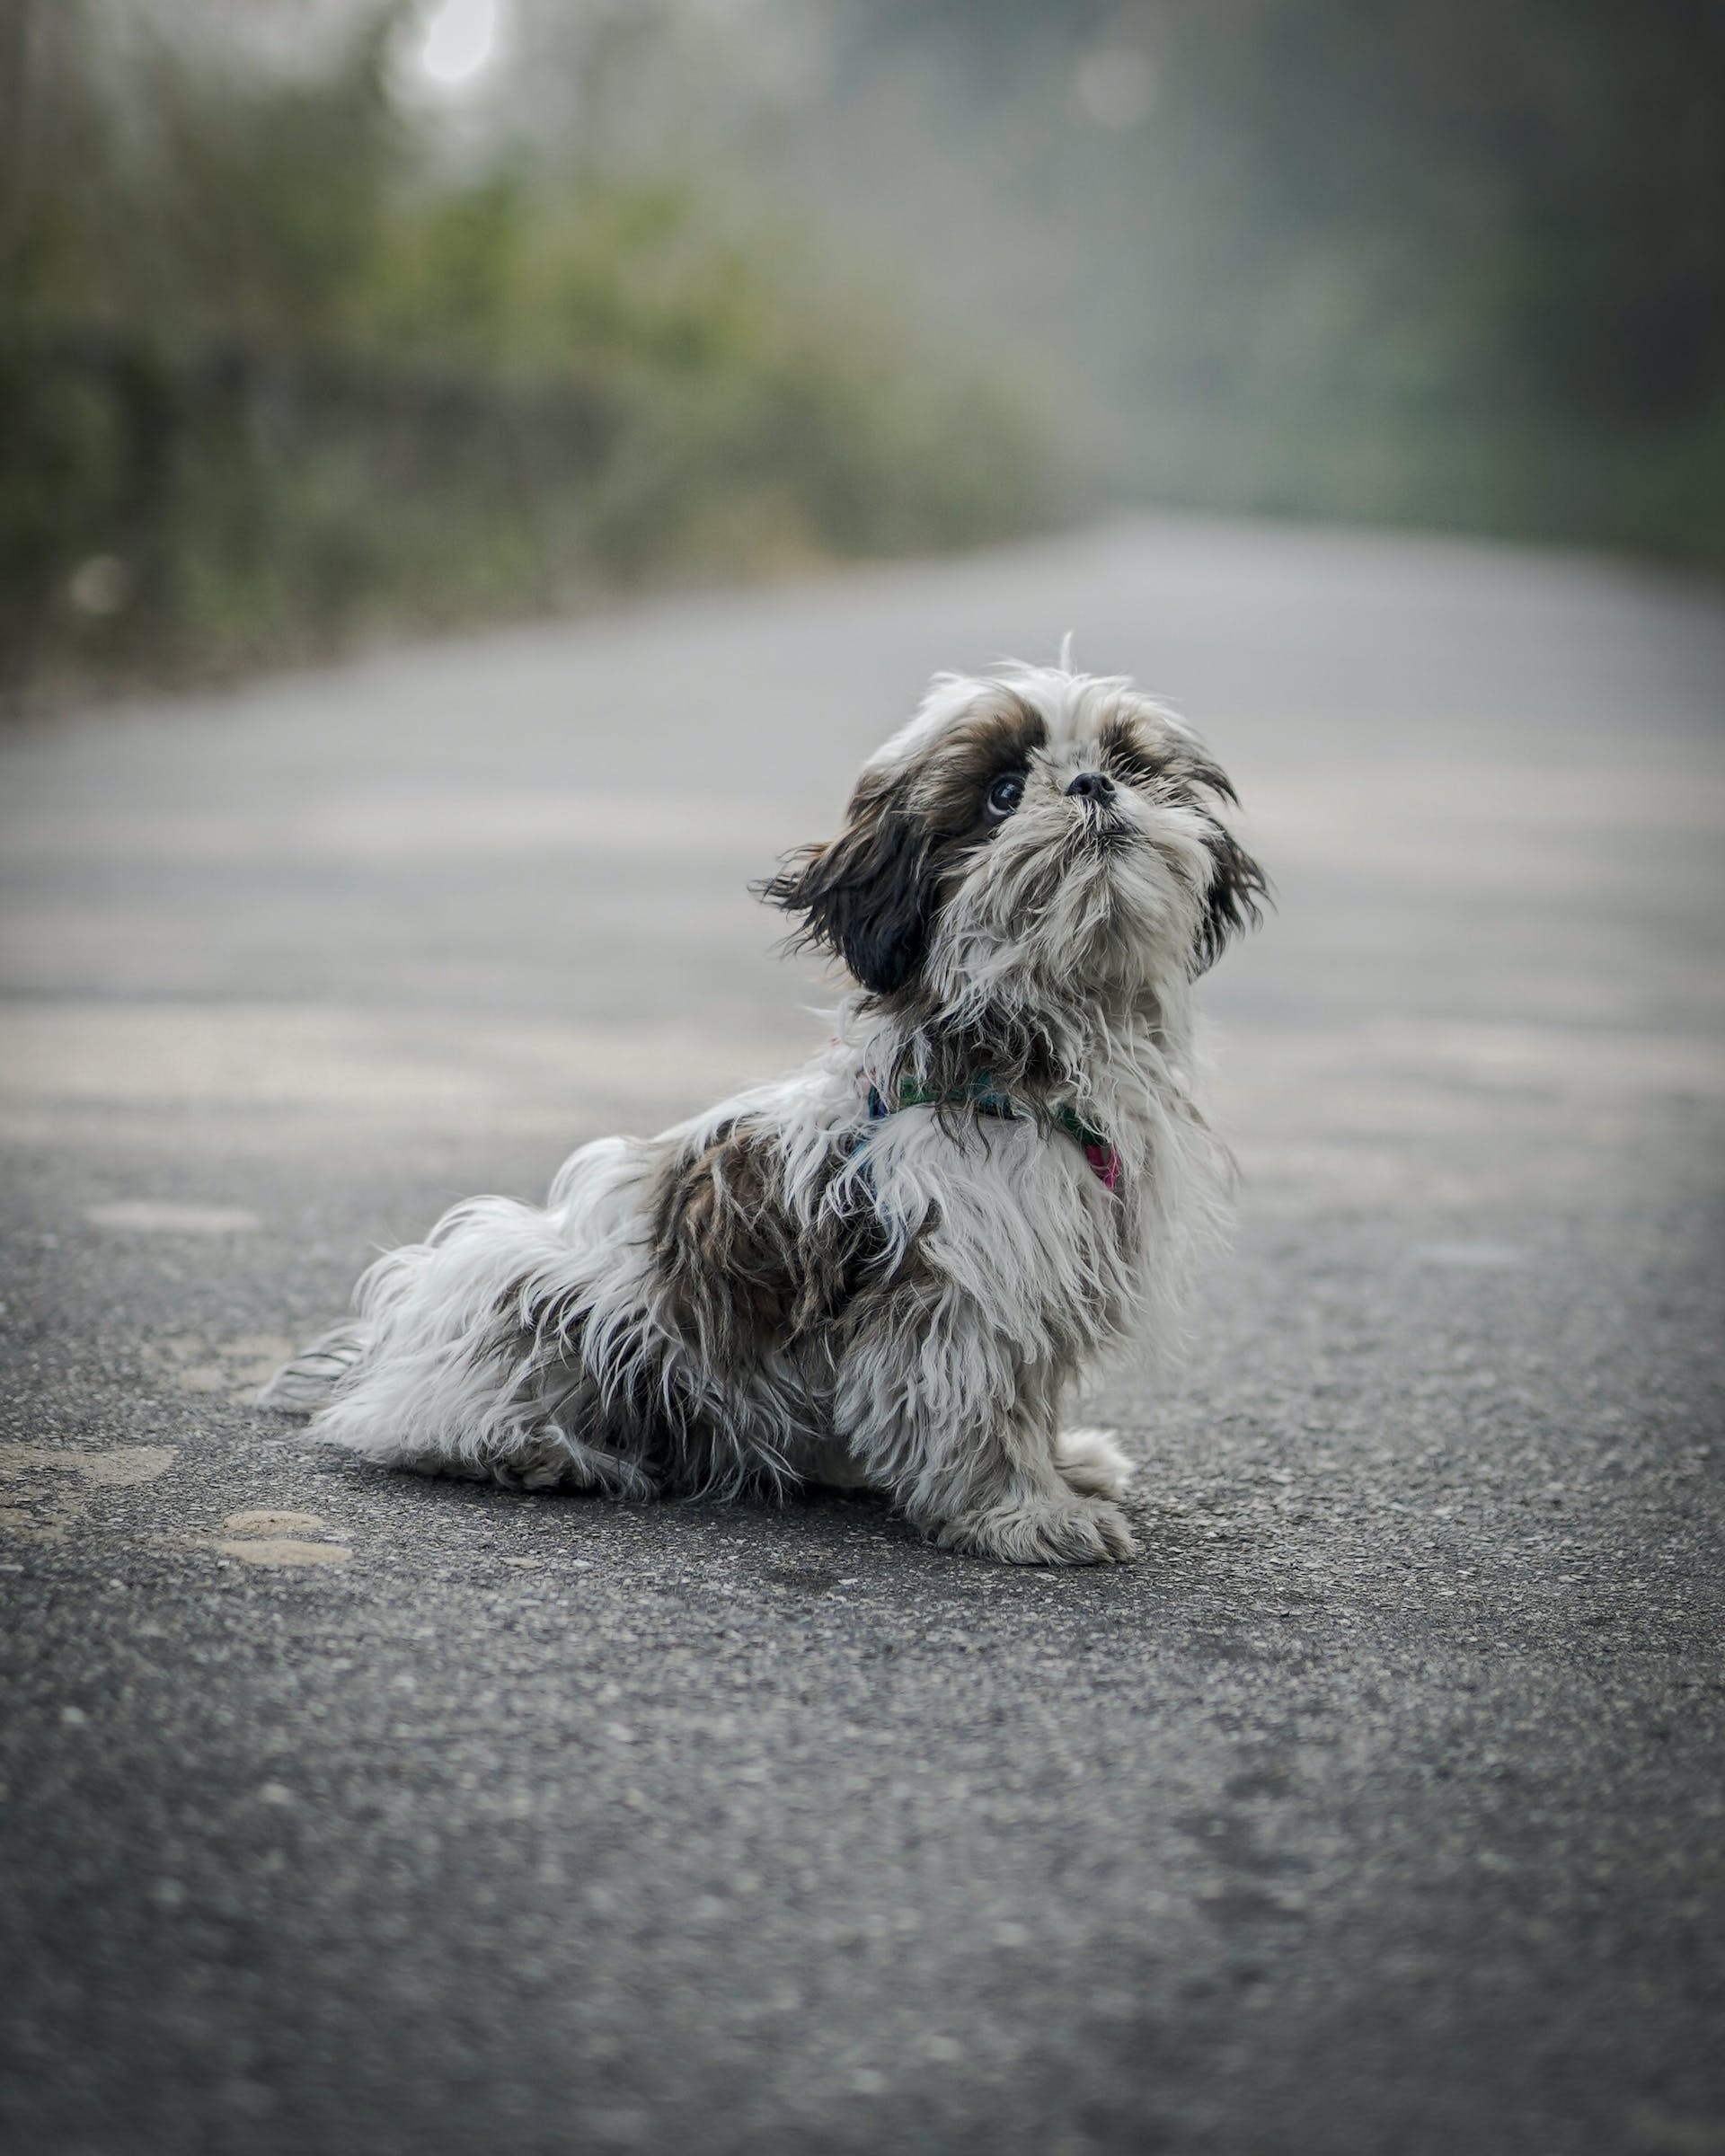 A small dog on a road | Source: Pexels